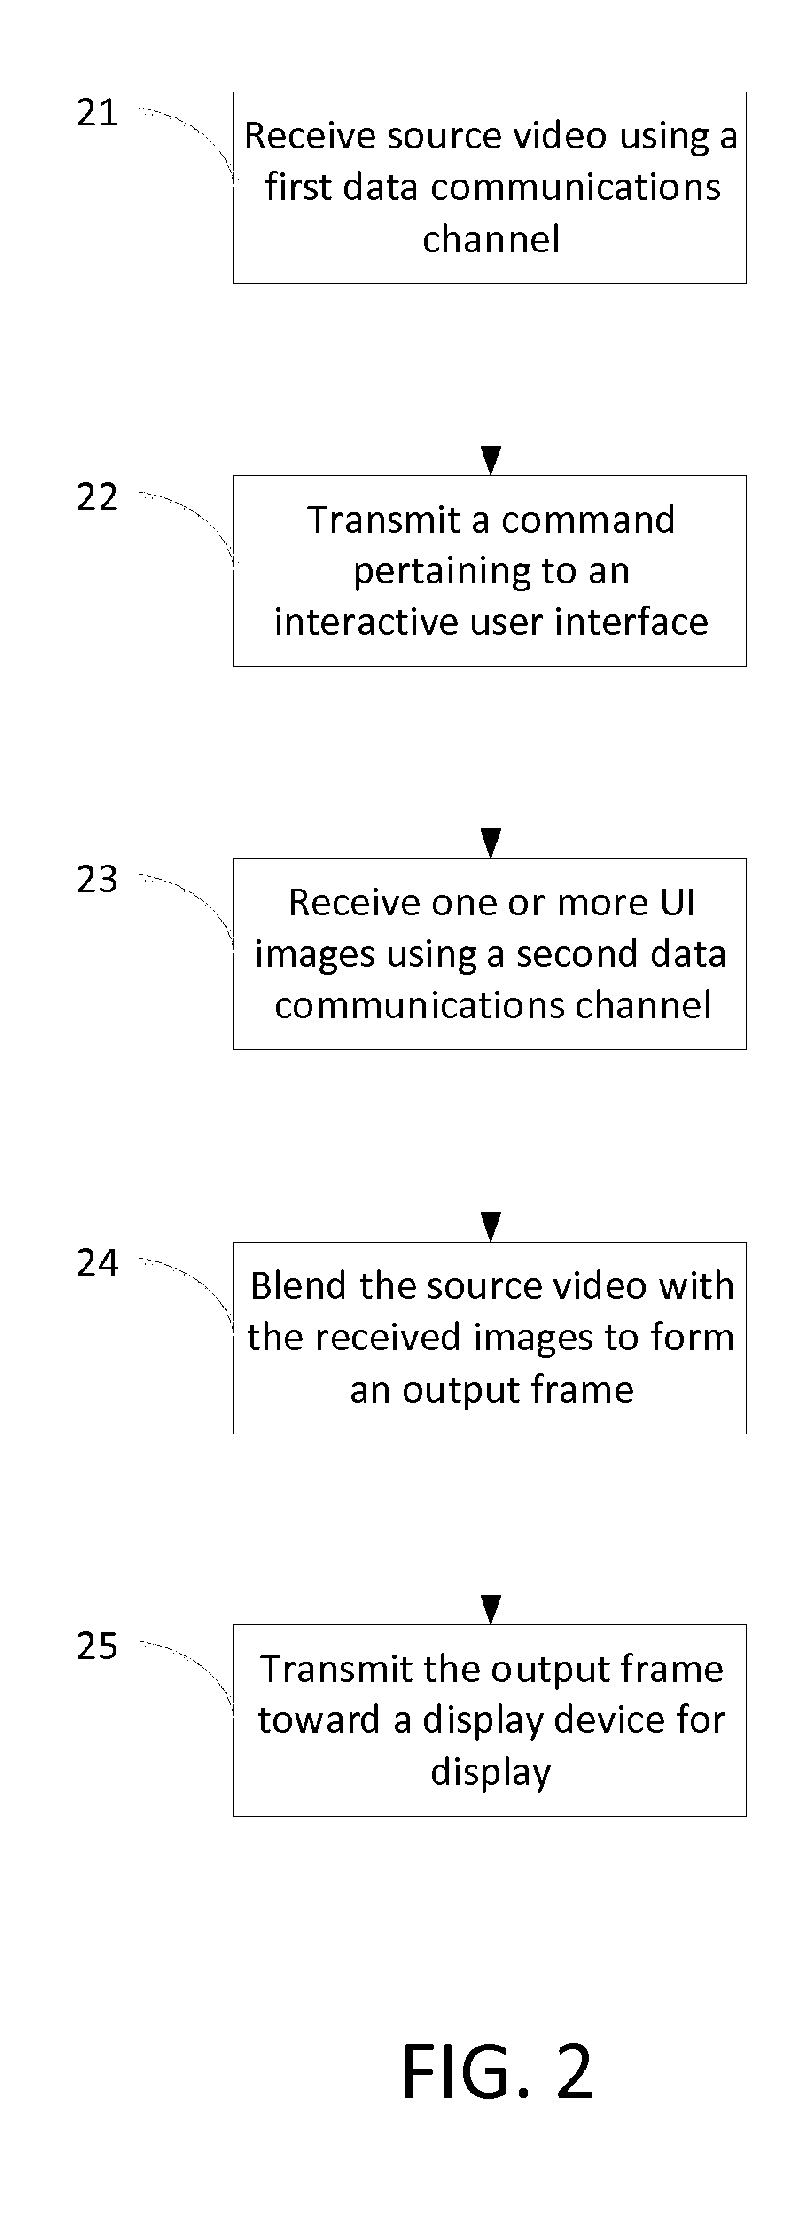 Overlay Rendering of User Interface Onto Source Video